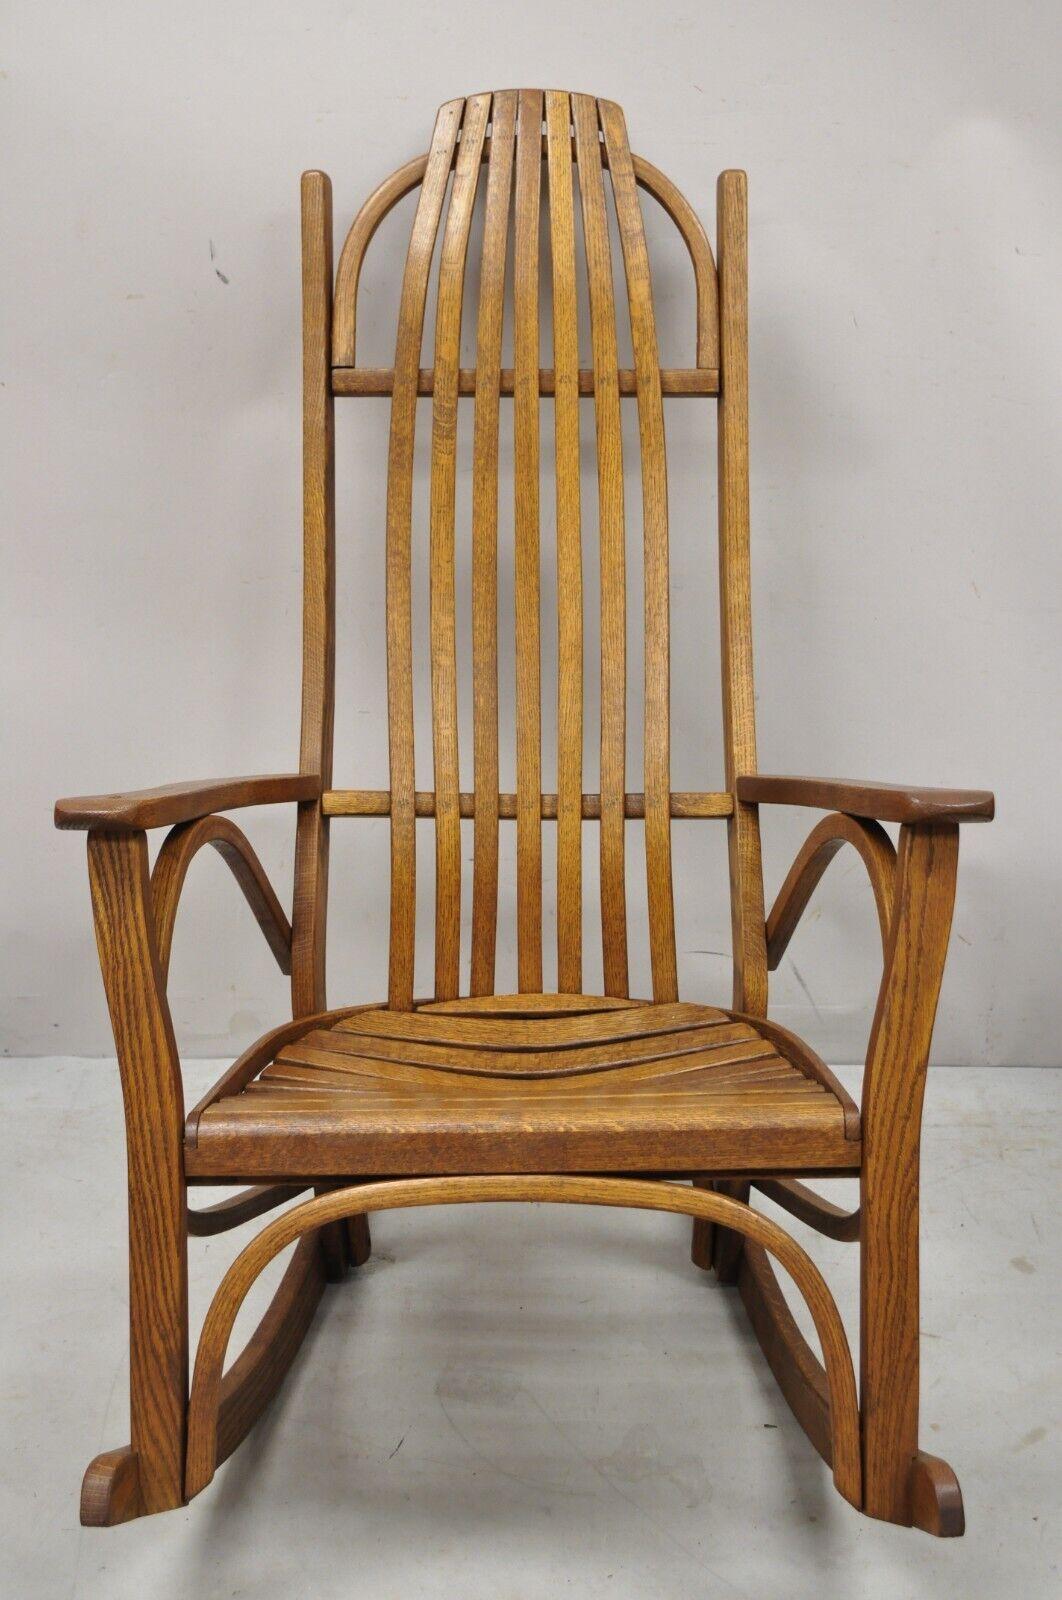 Vintage Oak Wood Adirondack Arts & Crafts Rocker Rocking Chair. Item features solid wood construction, beautiful wood grain, very nice vintage item, quality American craftsmanship, great style and form. Circa Mid 20th Century. Measurements: 42